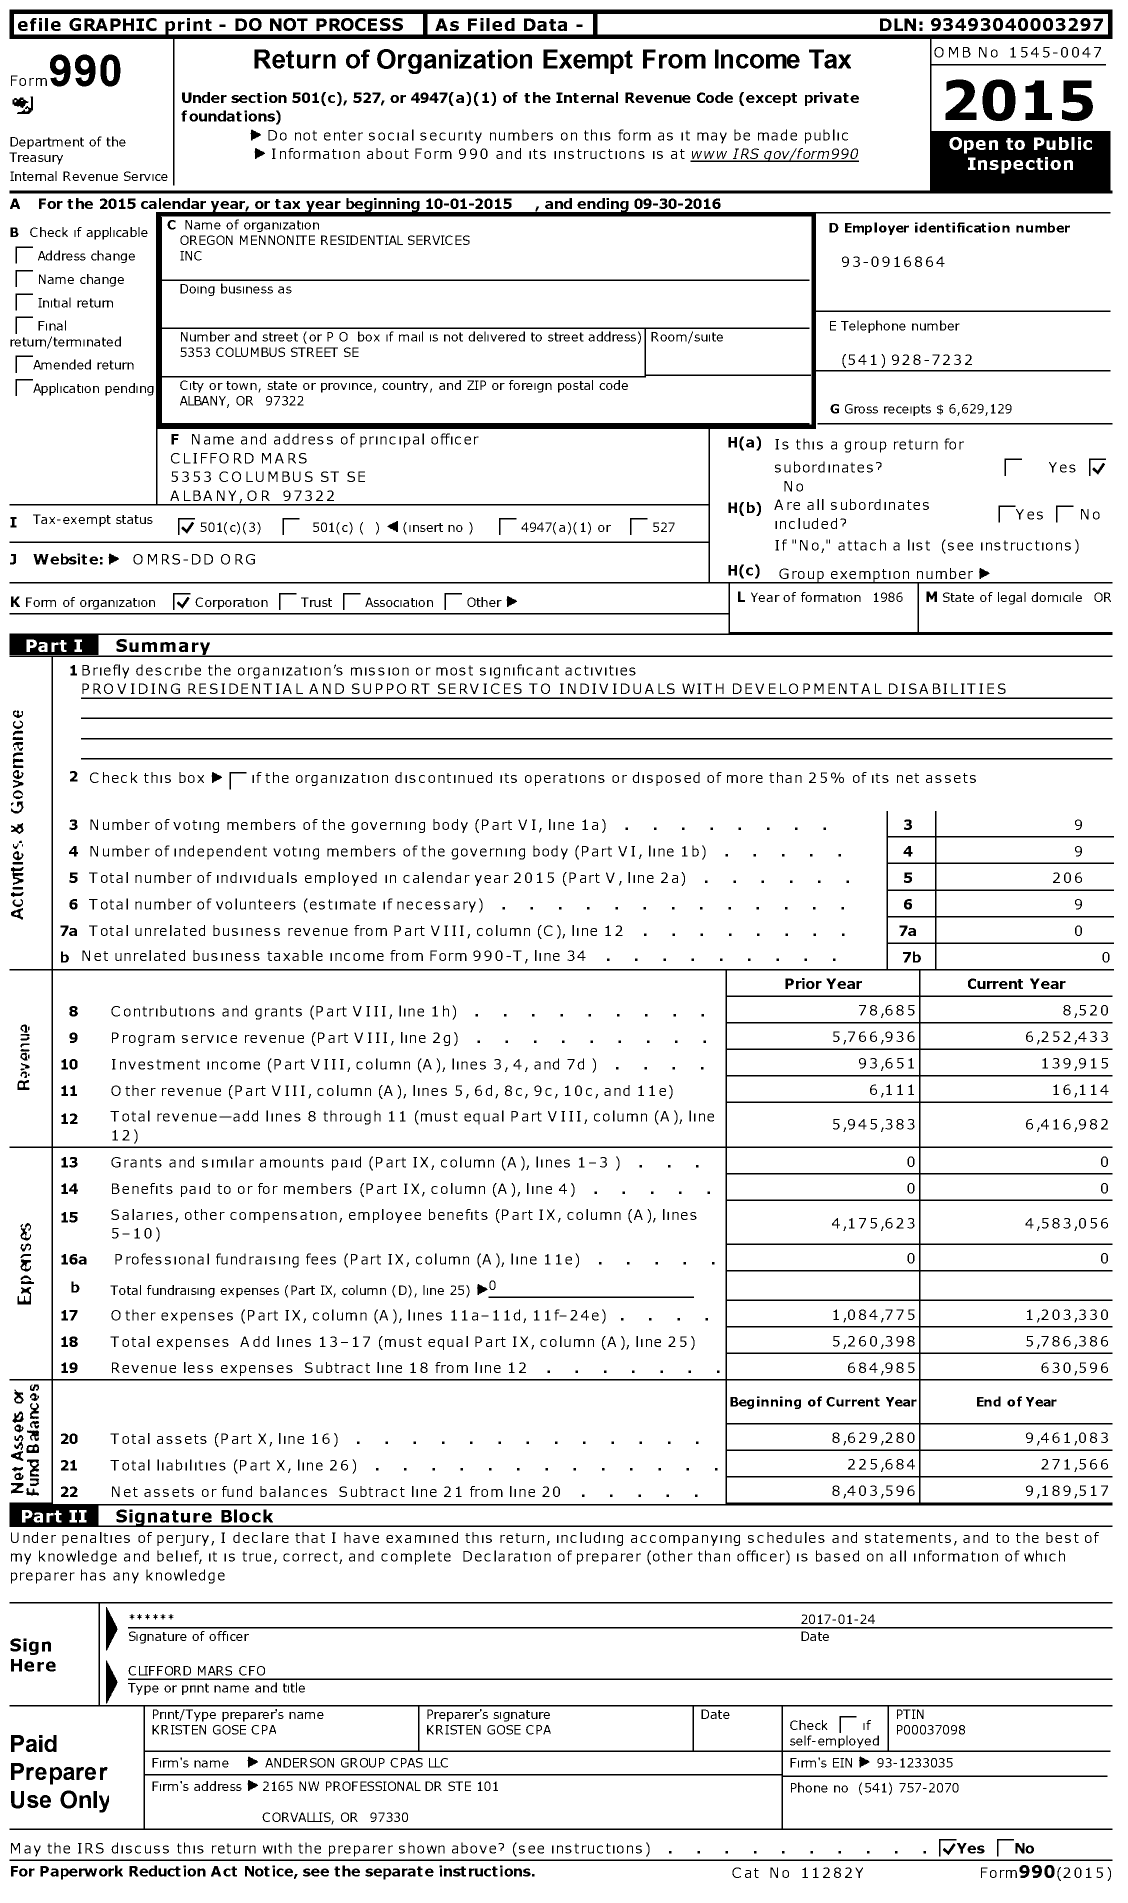 Image of first page of 2015 Form 990 for Oregon Mennonite Residential Services